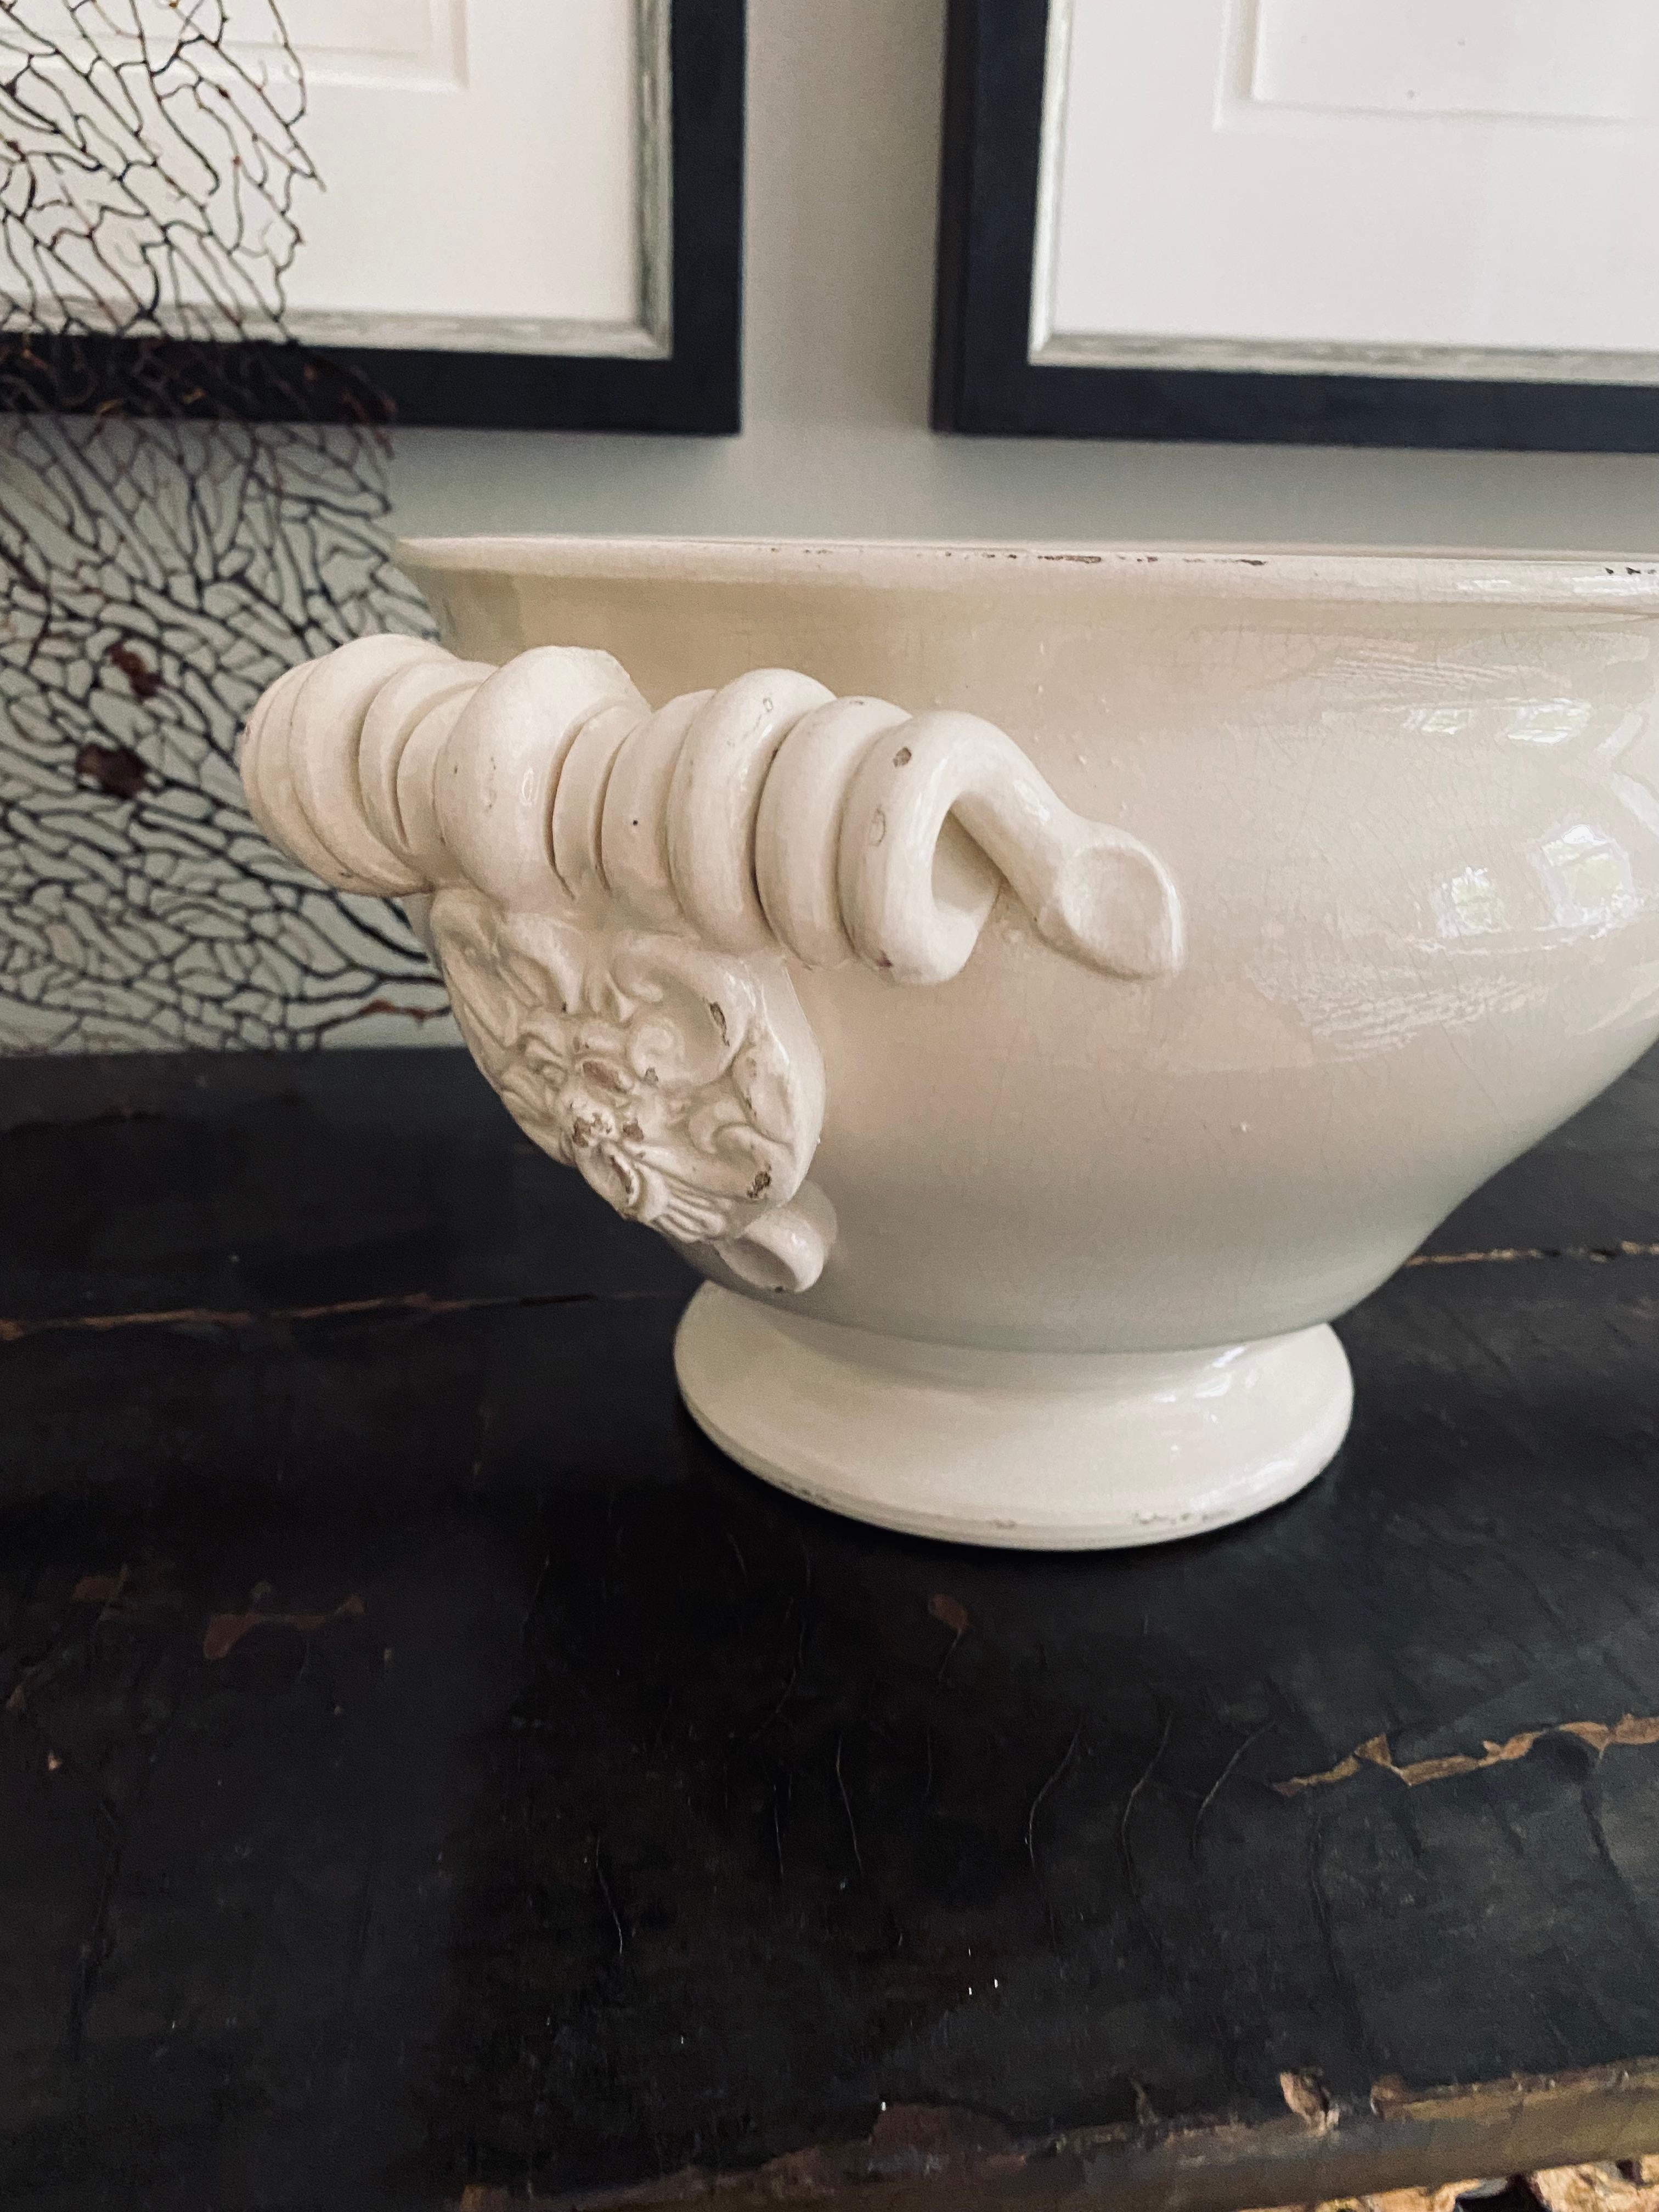  Ceramic bowl, ivory colored with crackle glaze and masqueron application For Sale 6